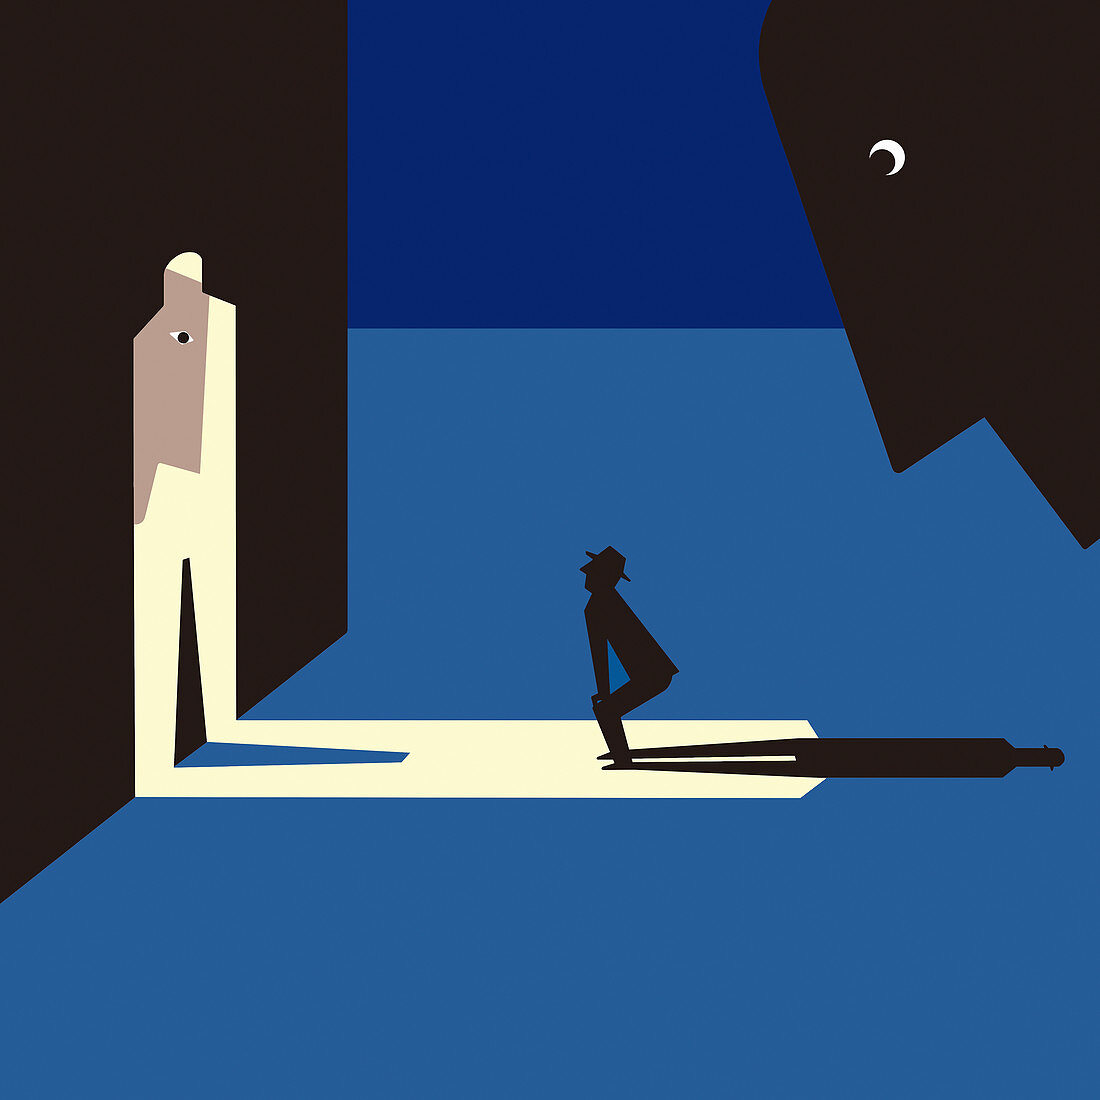 Man being watched by shadowy figures, illustration